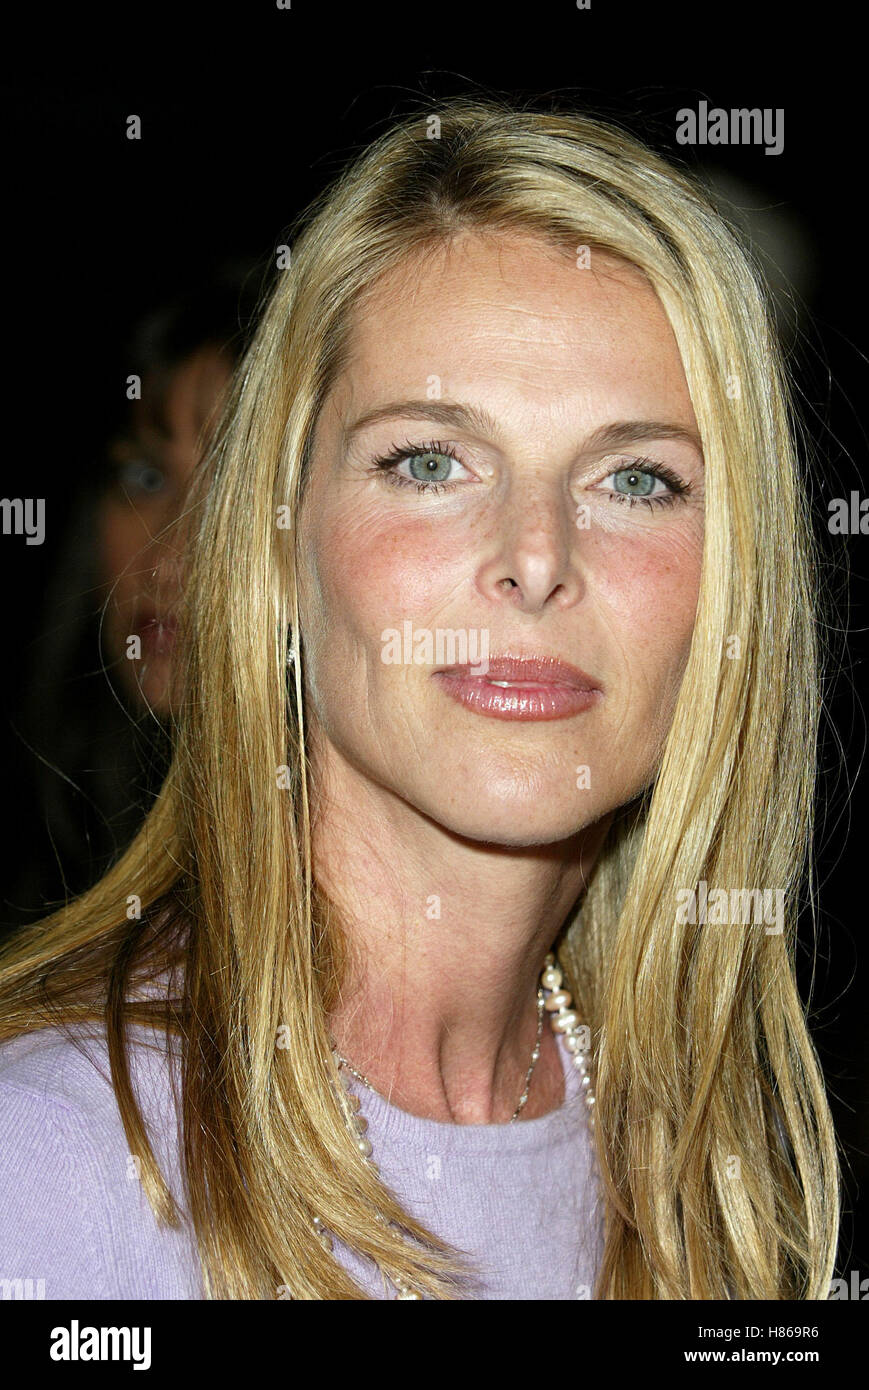 CATHERINE OXENBERG 2ND ADOPT-A-MINEFIELD BENEFIT CENTURY PLAZA HOTEL CENTURY CITY LOS ANGELES USA 18 September 2002 Stock Photo